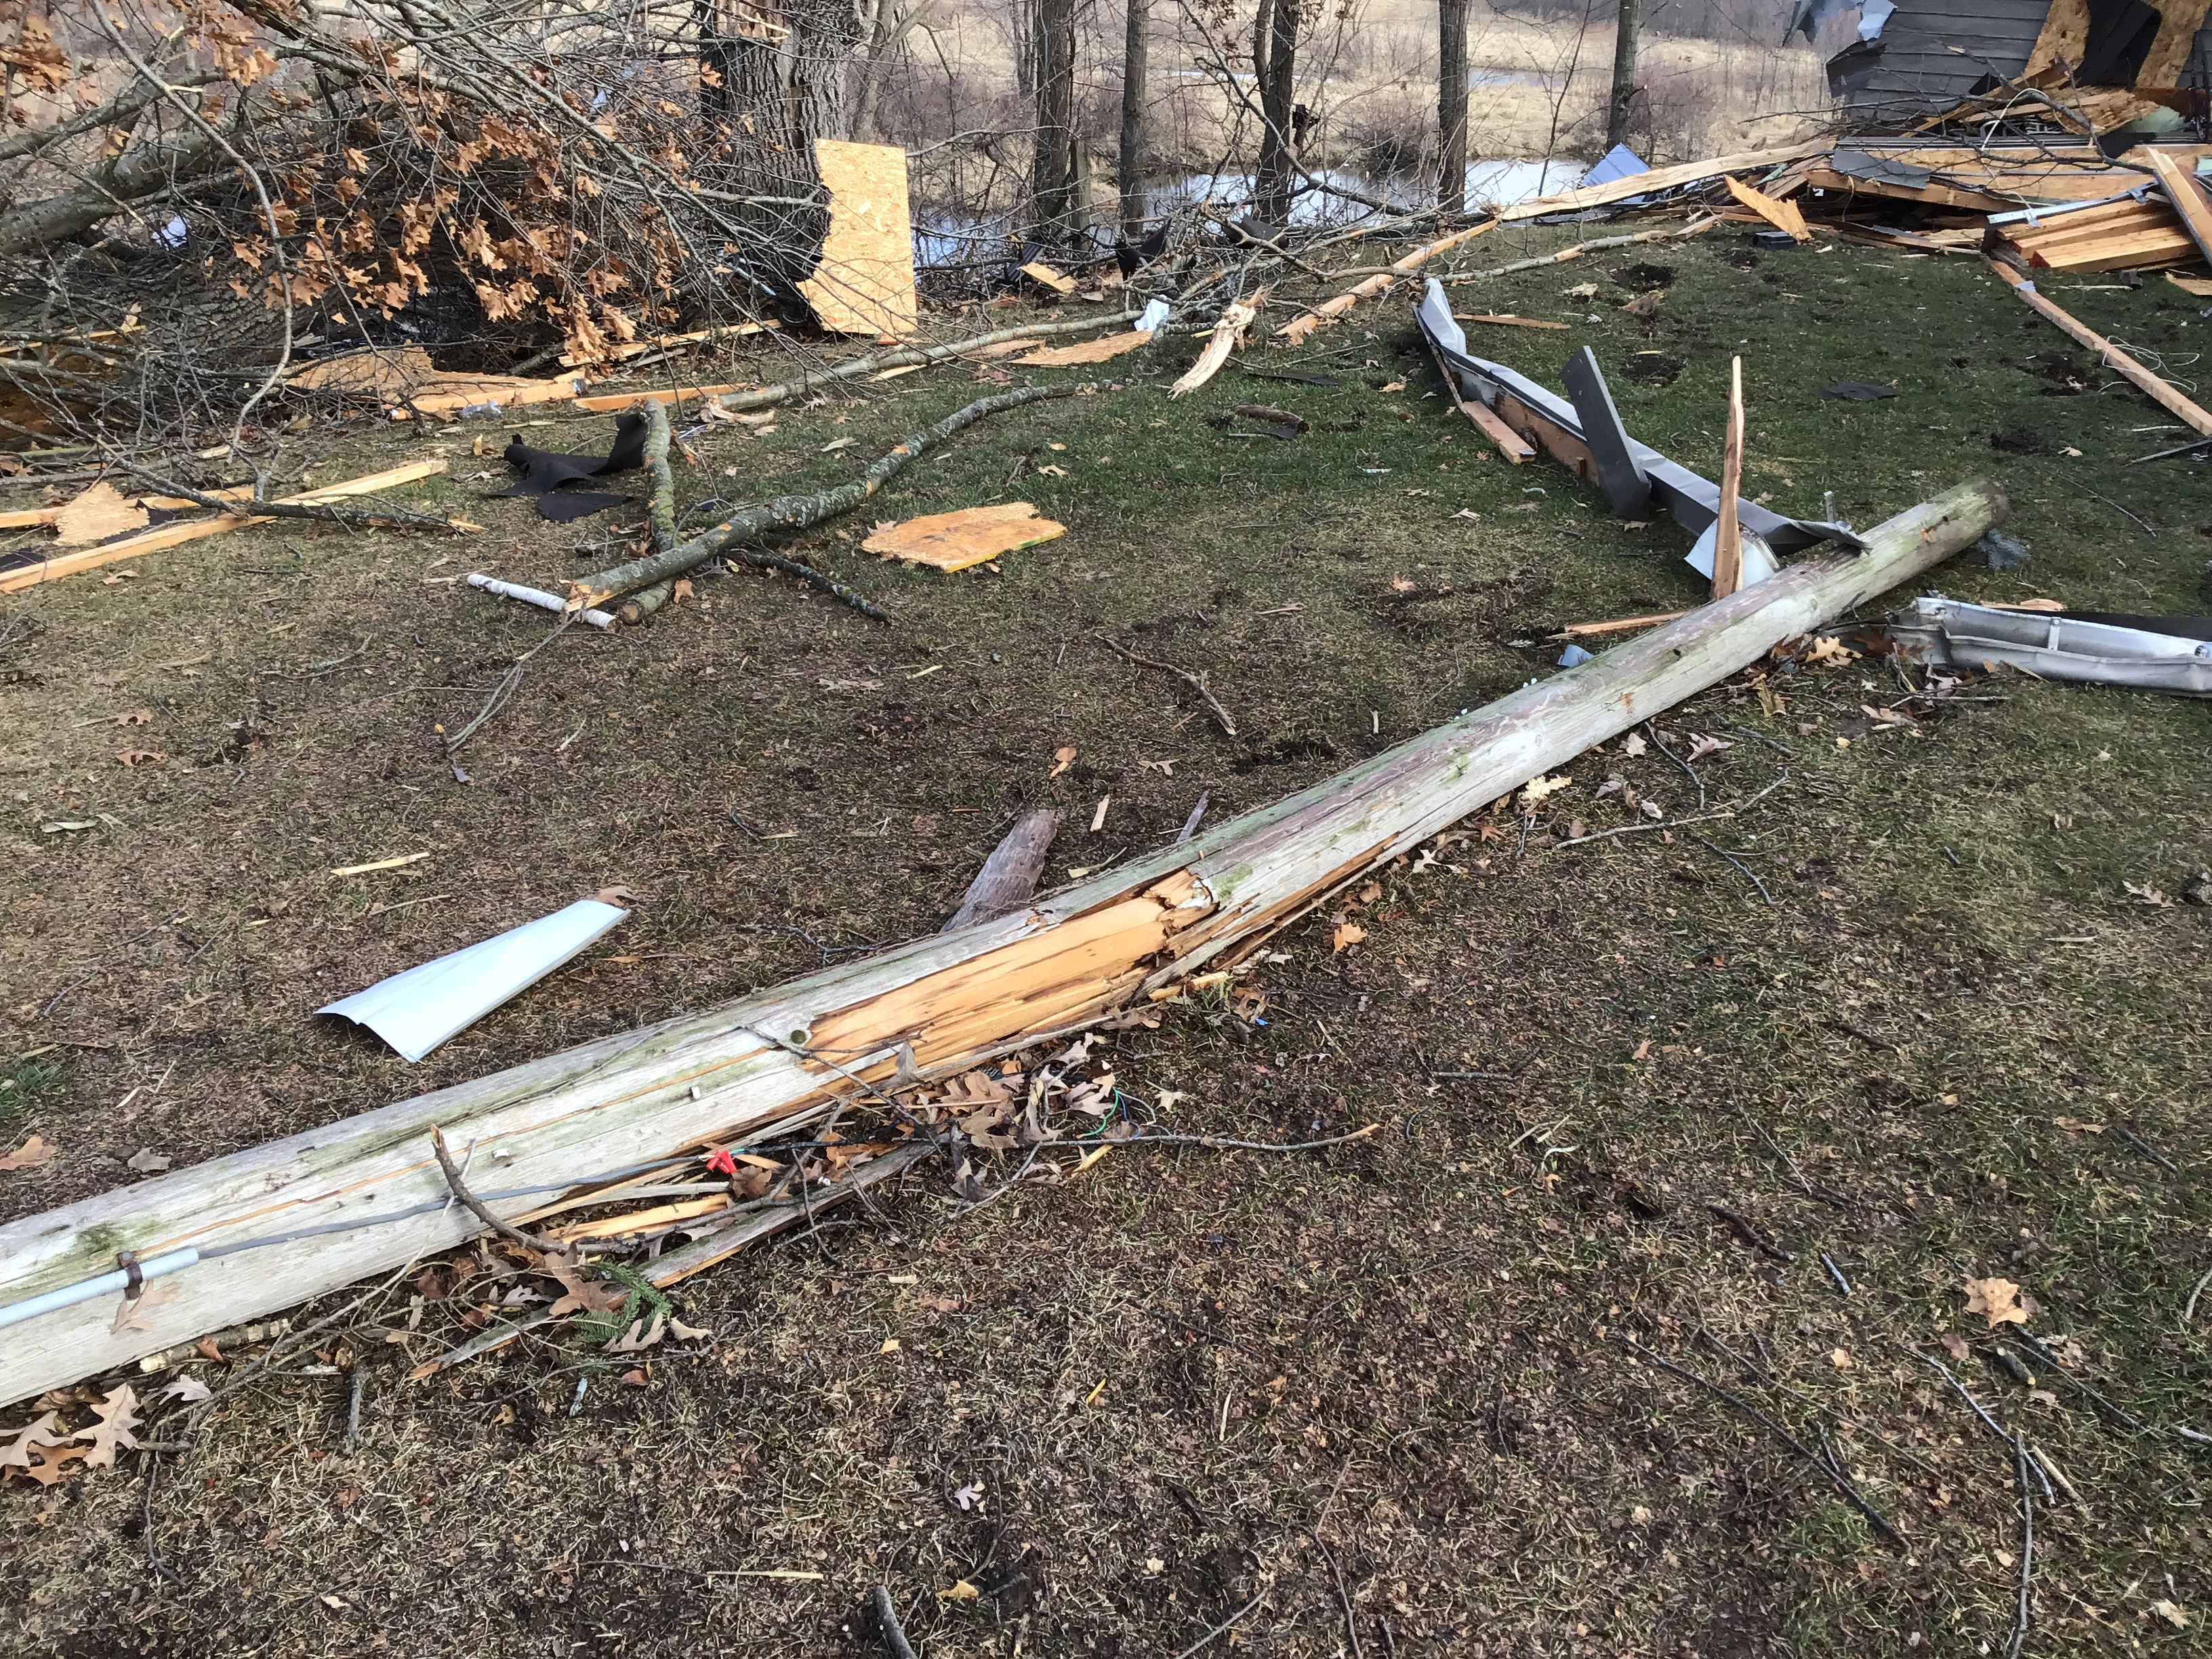 Wooden pole on ground and debris across yard